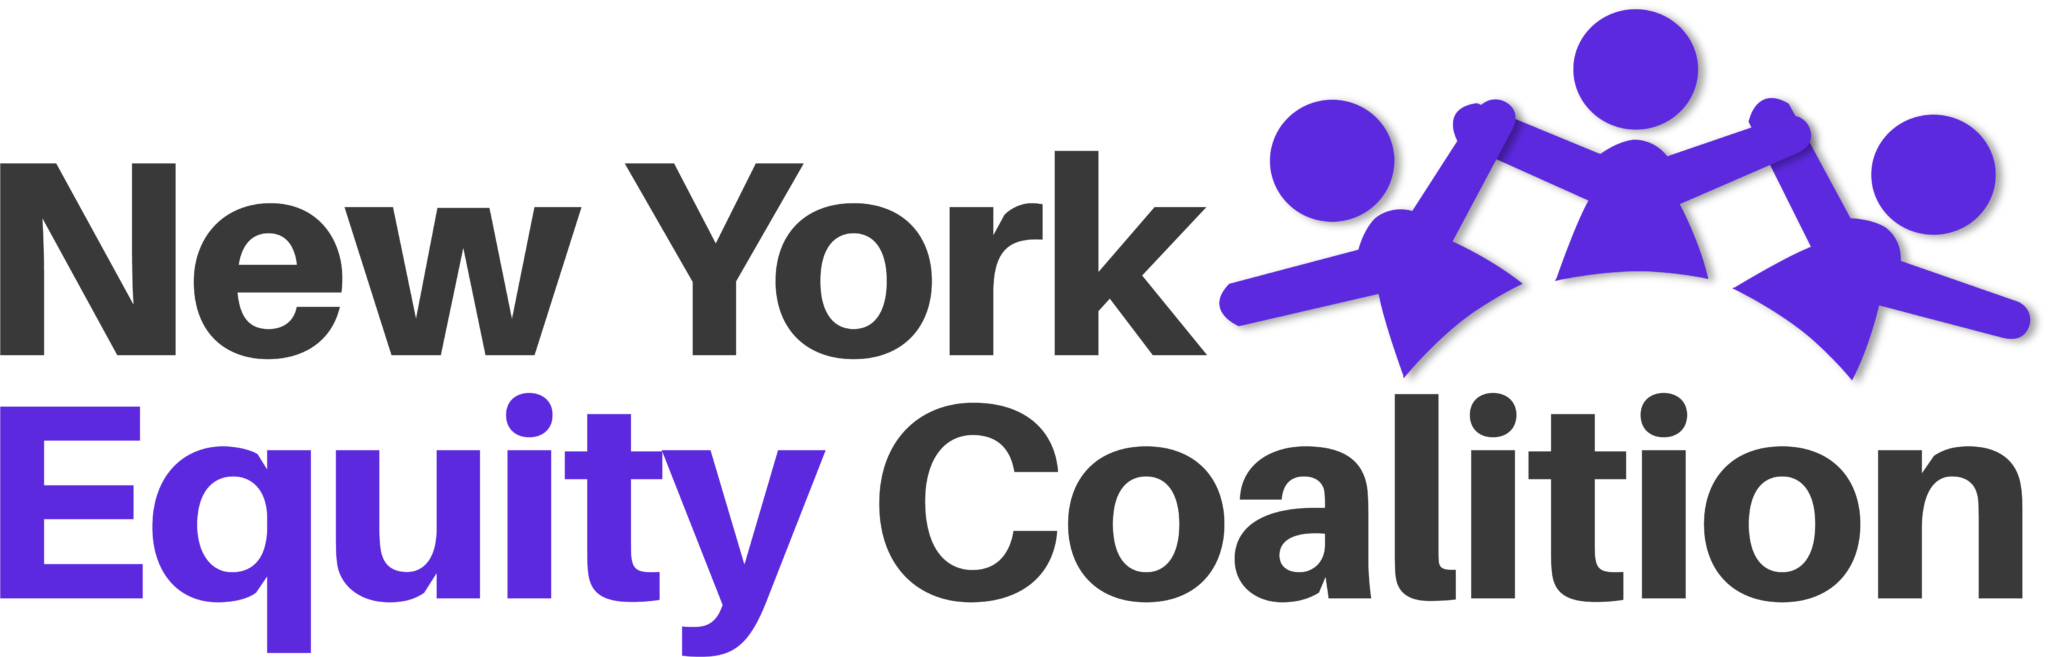 The New York Equity Coalition